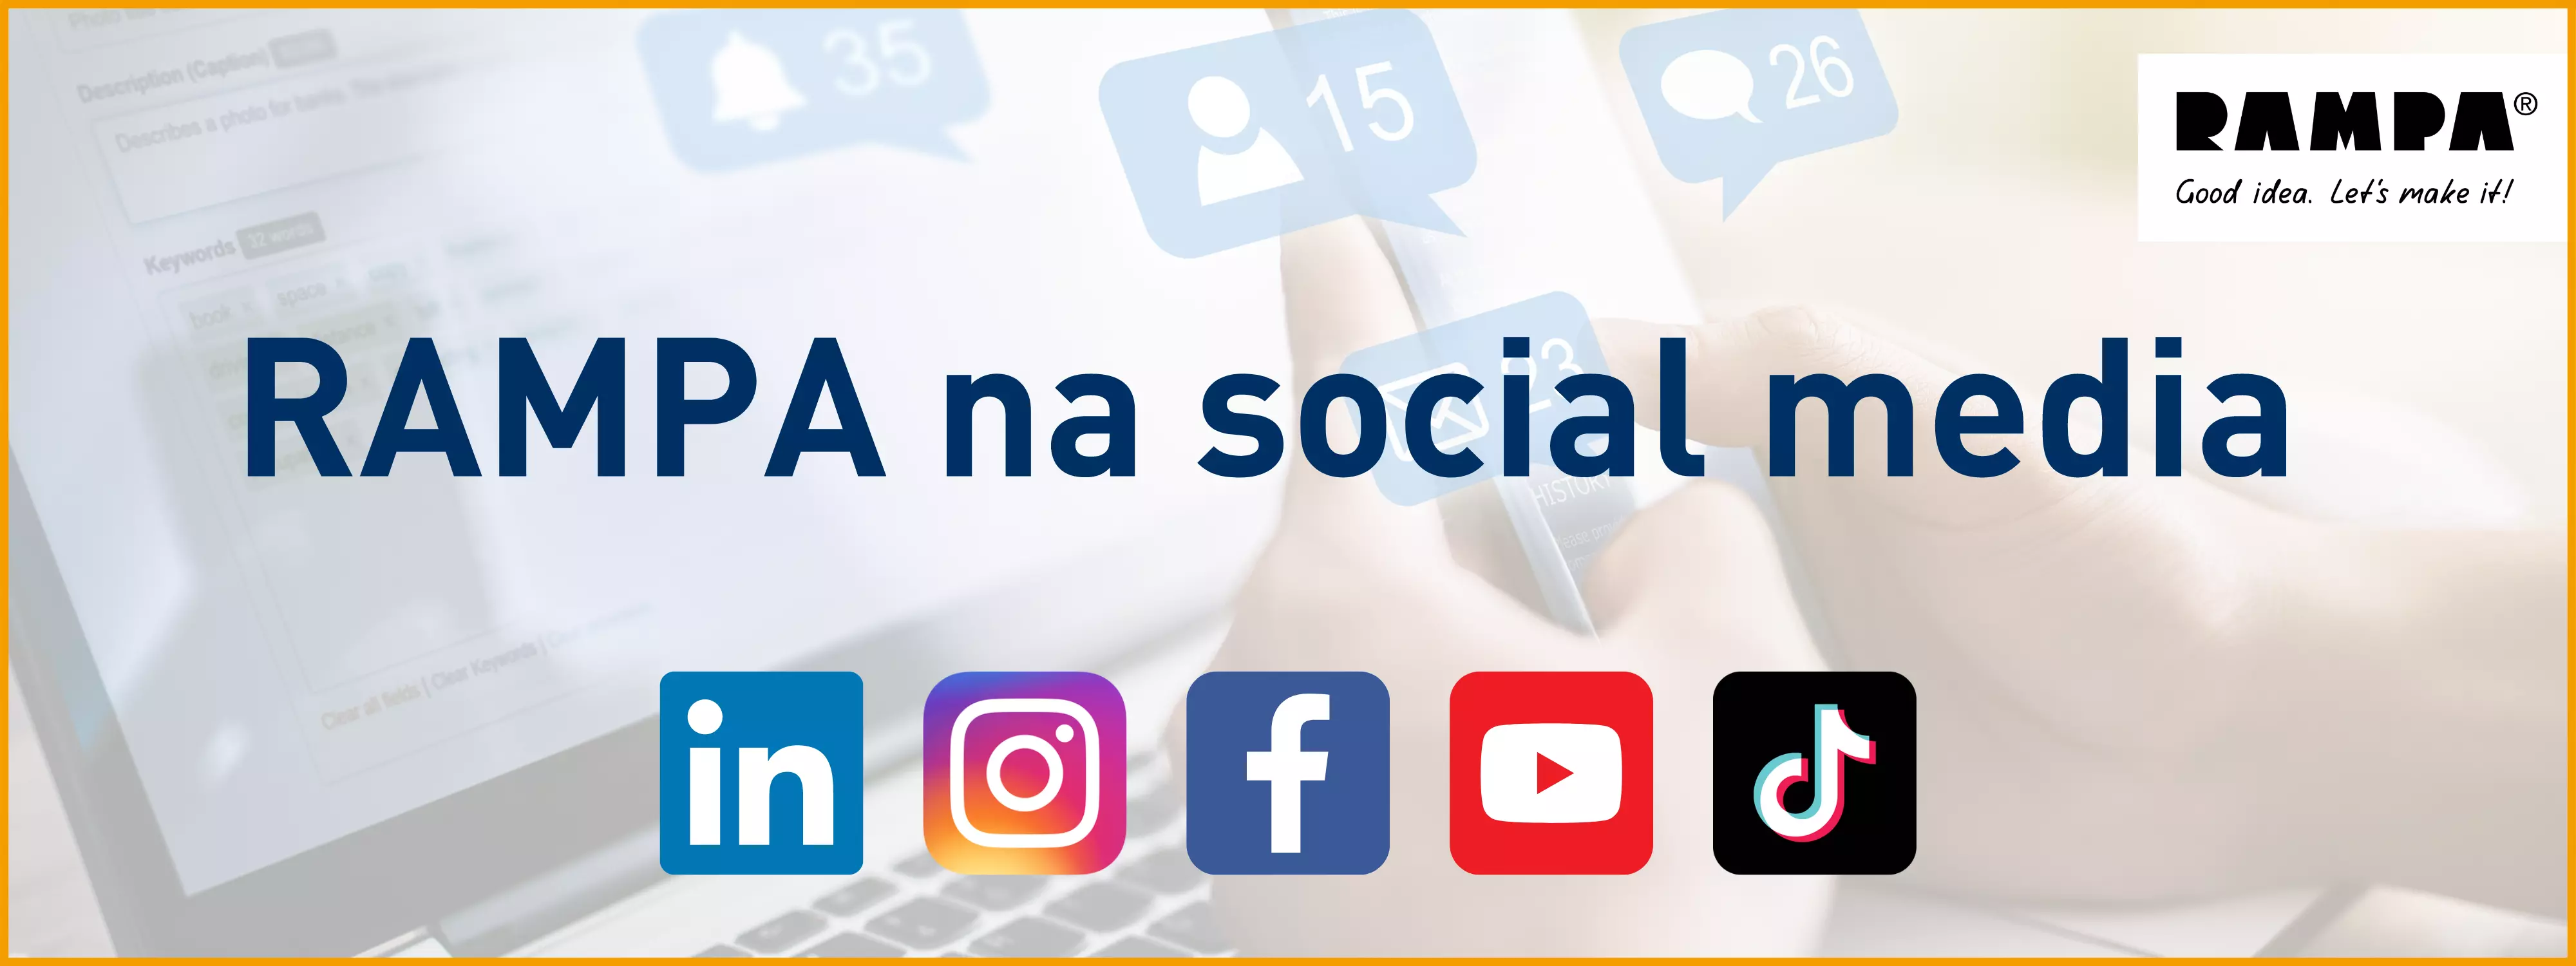 RAMPA is present on various social media channels, which can be seen in the picture.